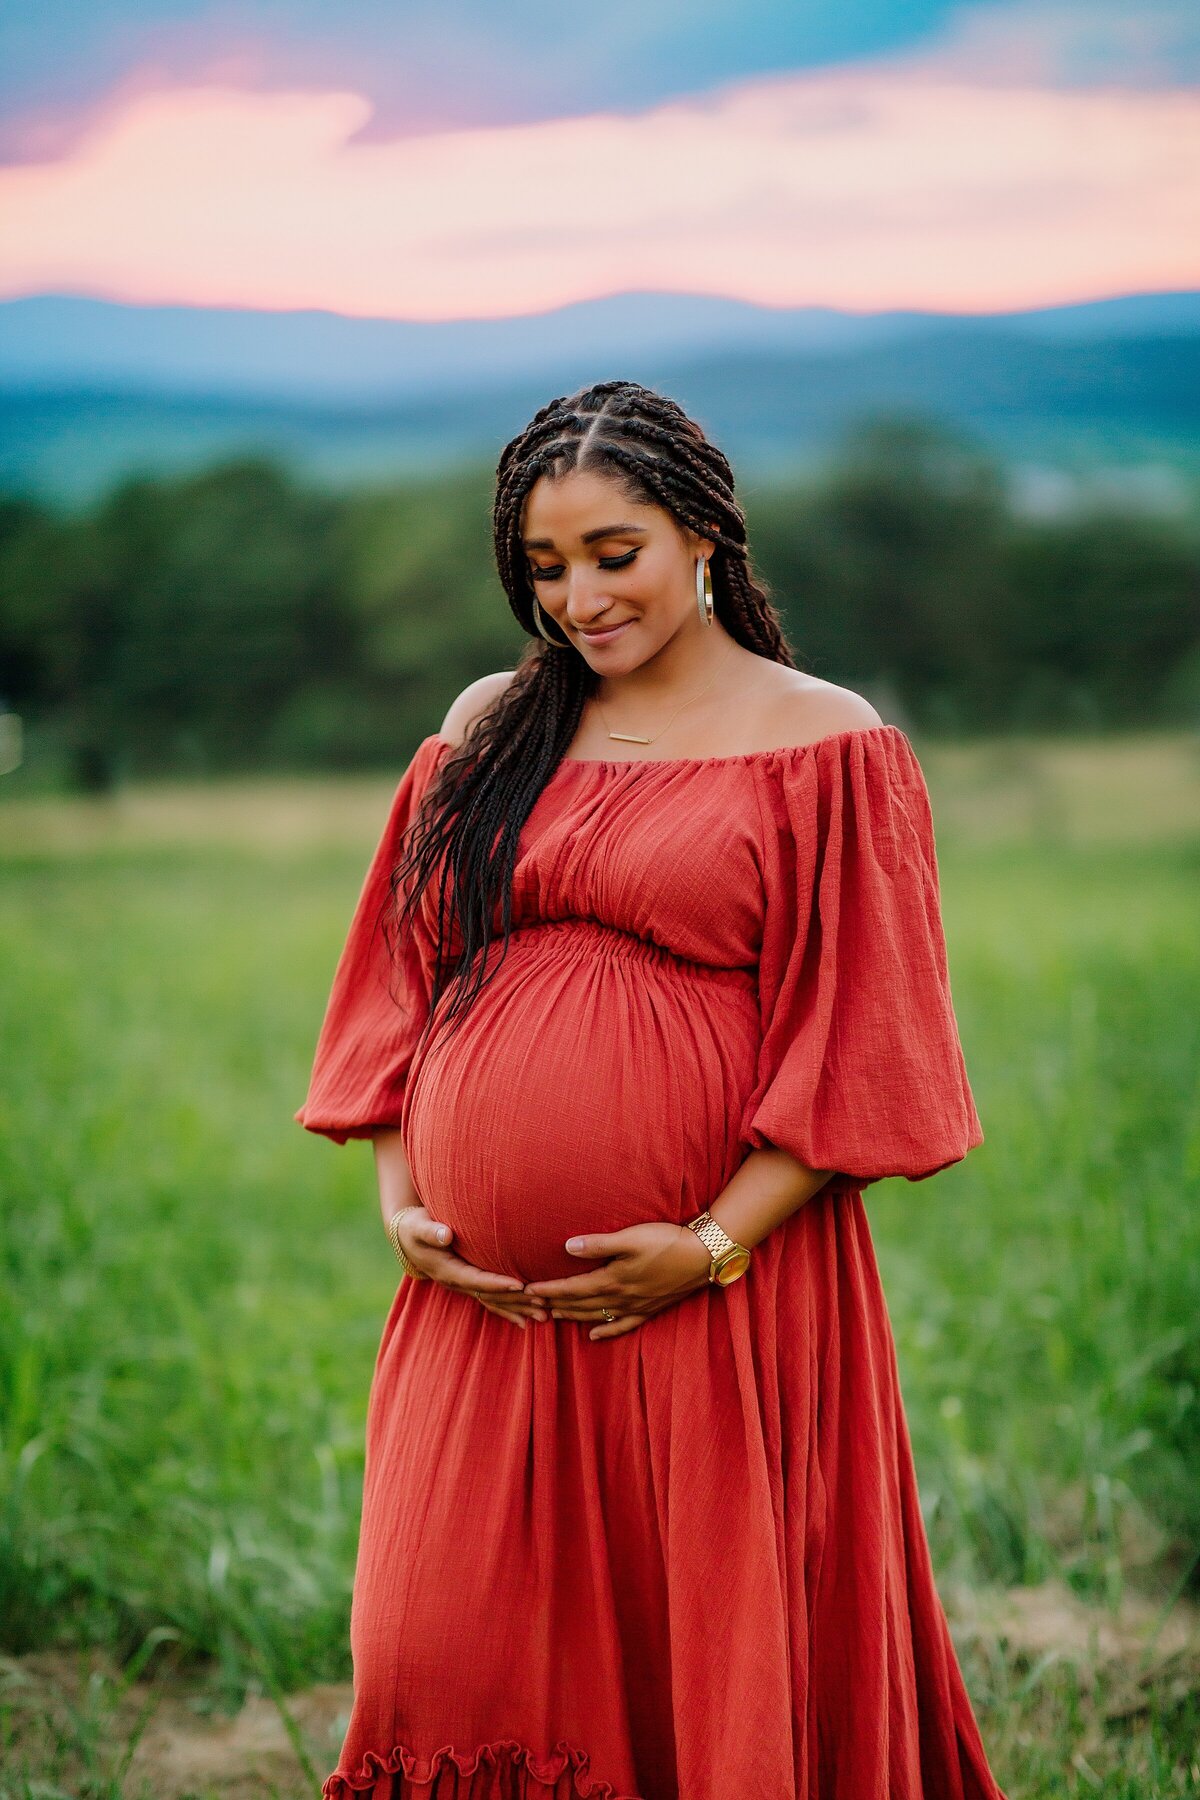 Pregnant mom in red gown at sunset with mountain view